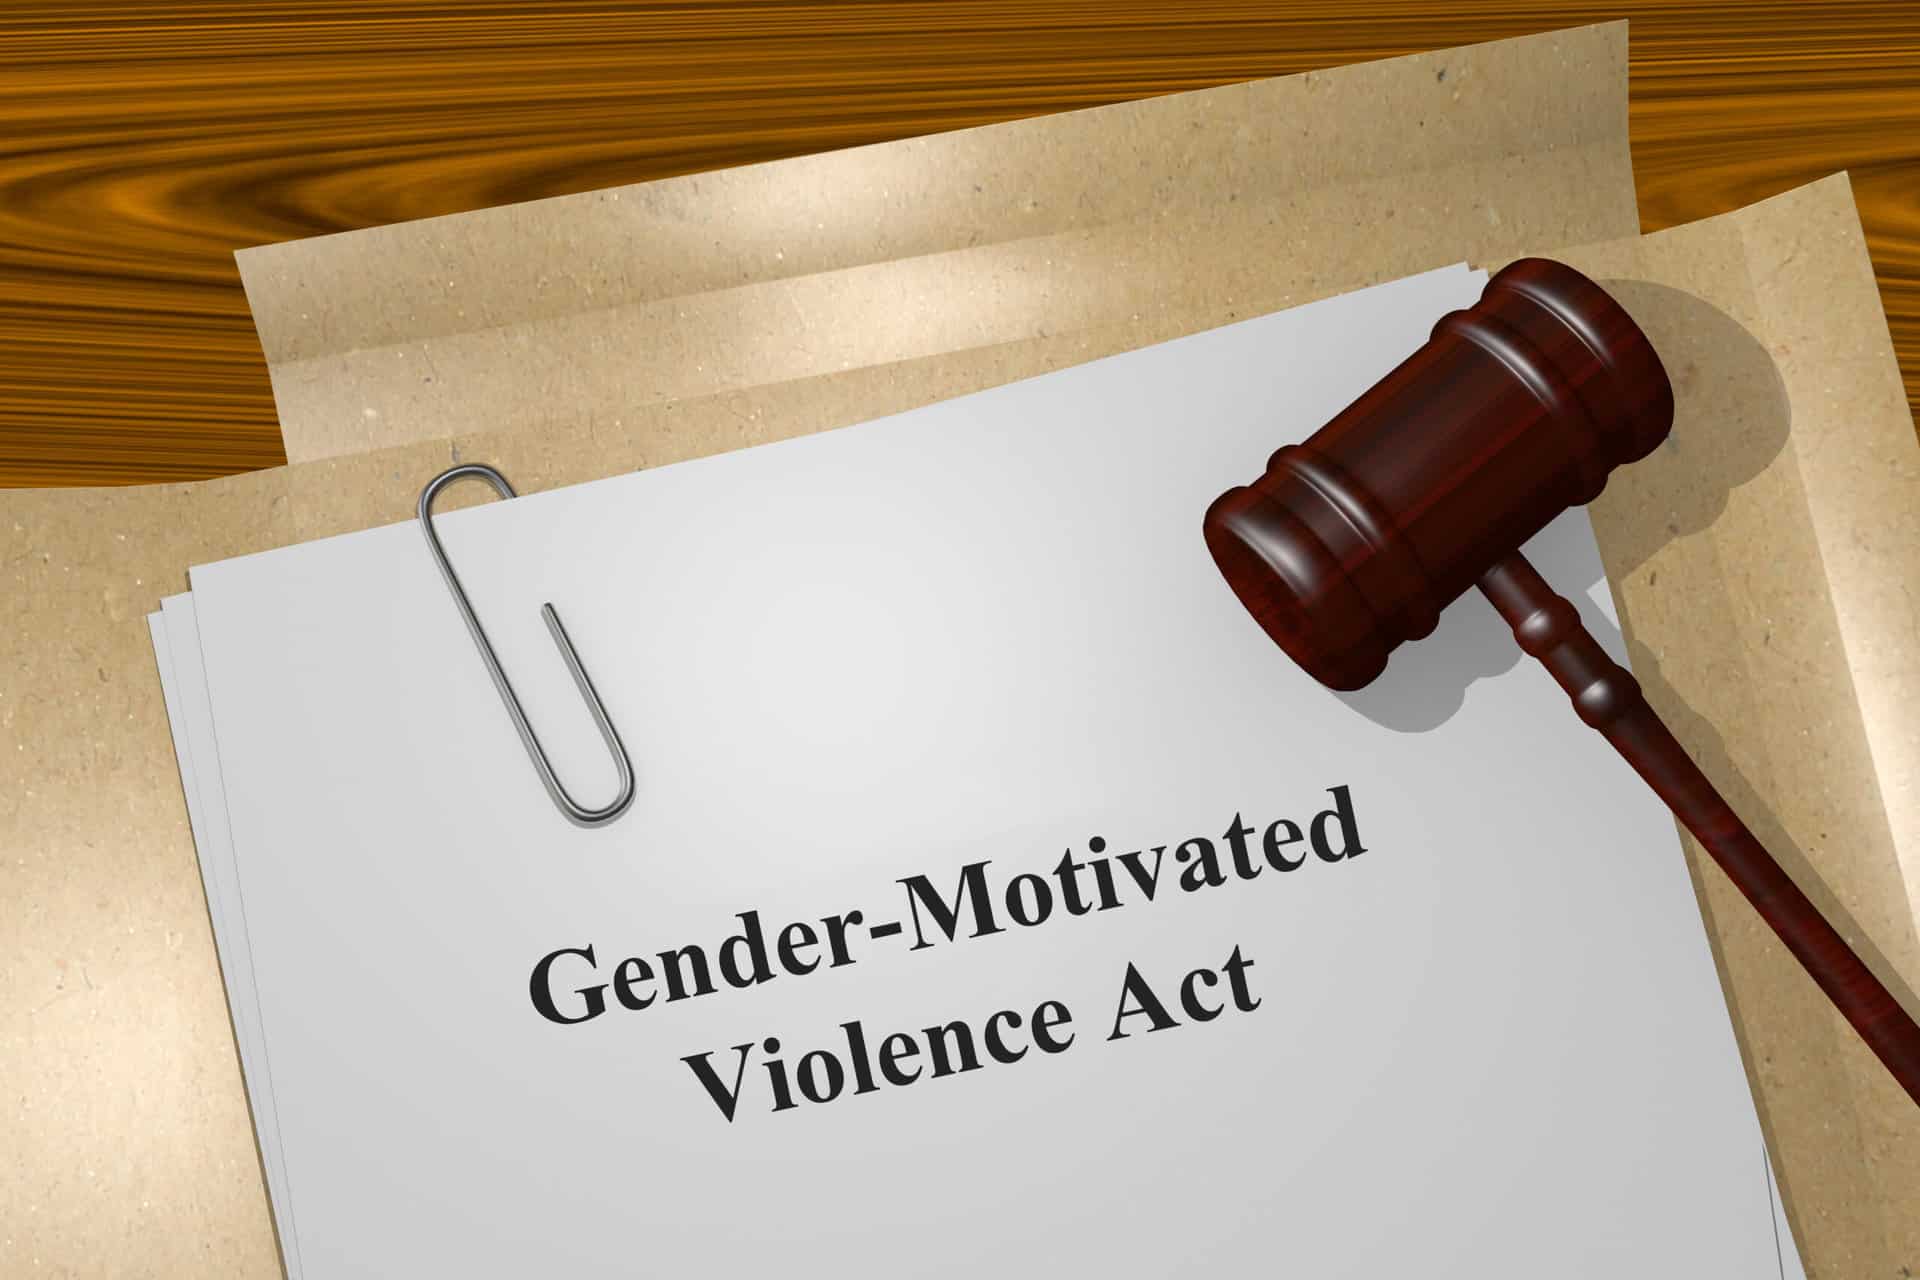 Gender-Motivated Violence Protection Act On Legal Documents